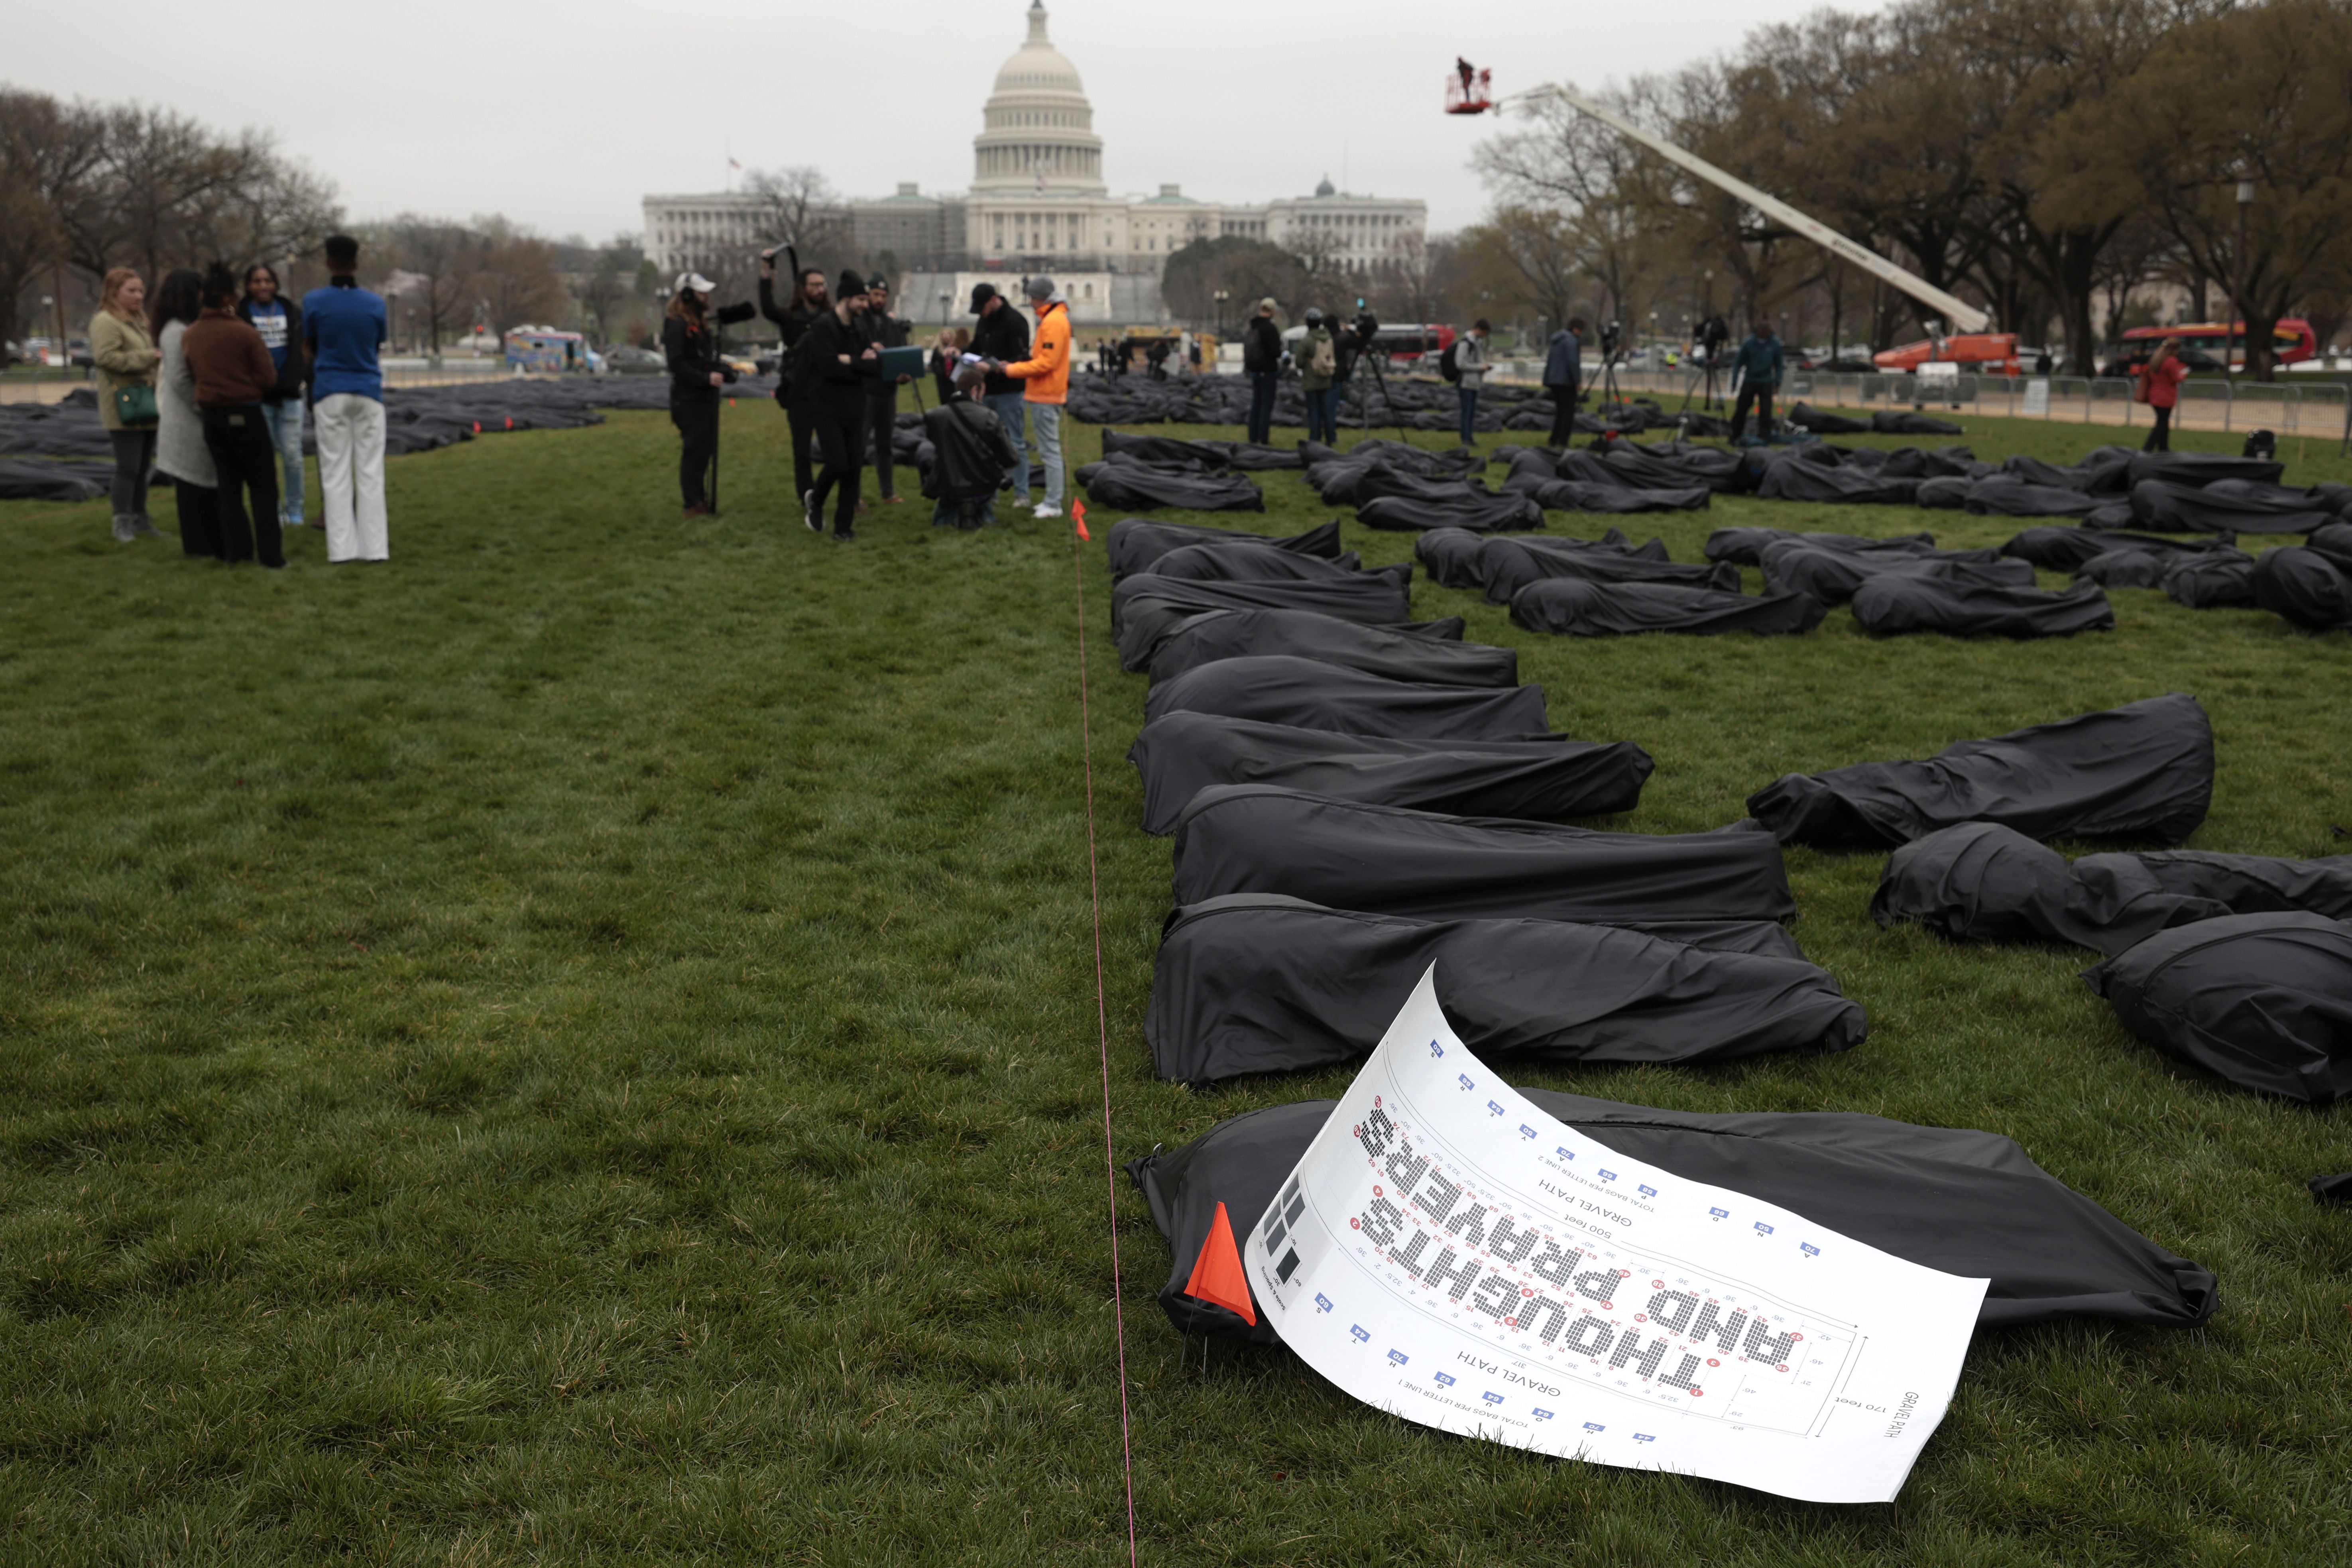 Body bags are assembled on the National Mall by gun control activist group March For Our Lives on March 24, 2022 in Washington, DC